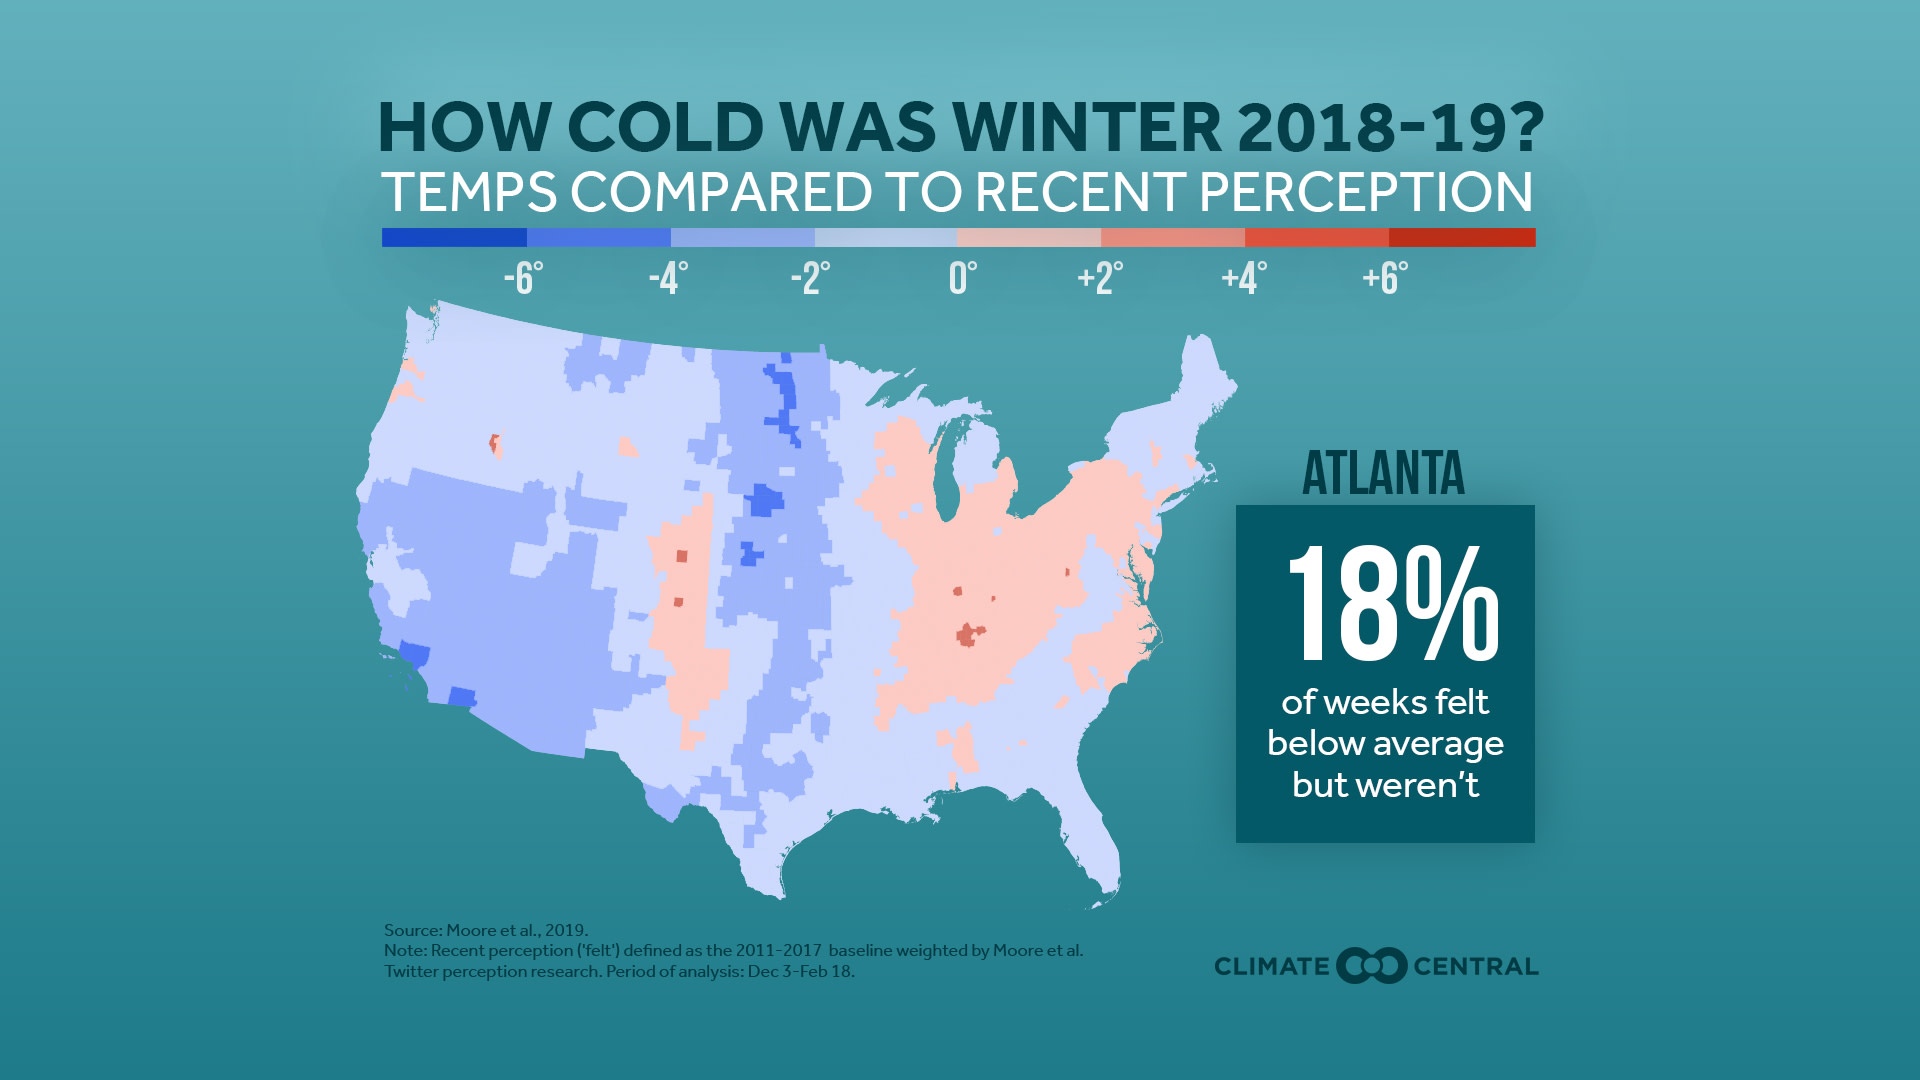 Market - How Was This Winter’s Cold Perceived?